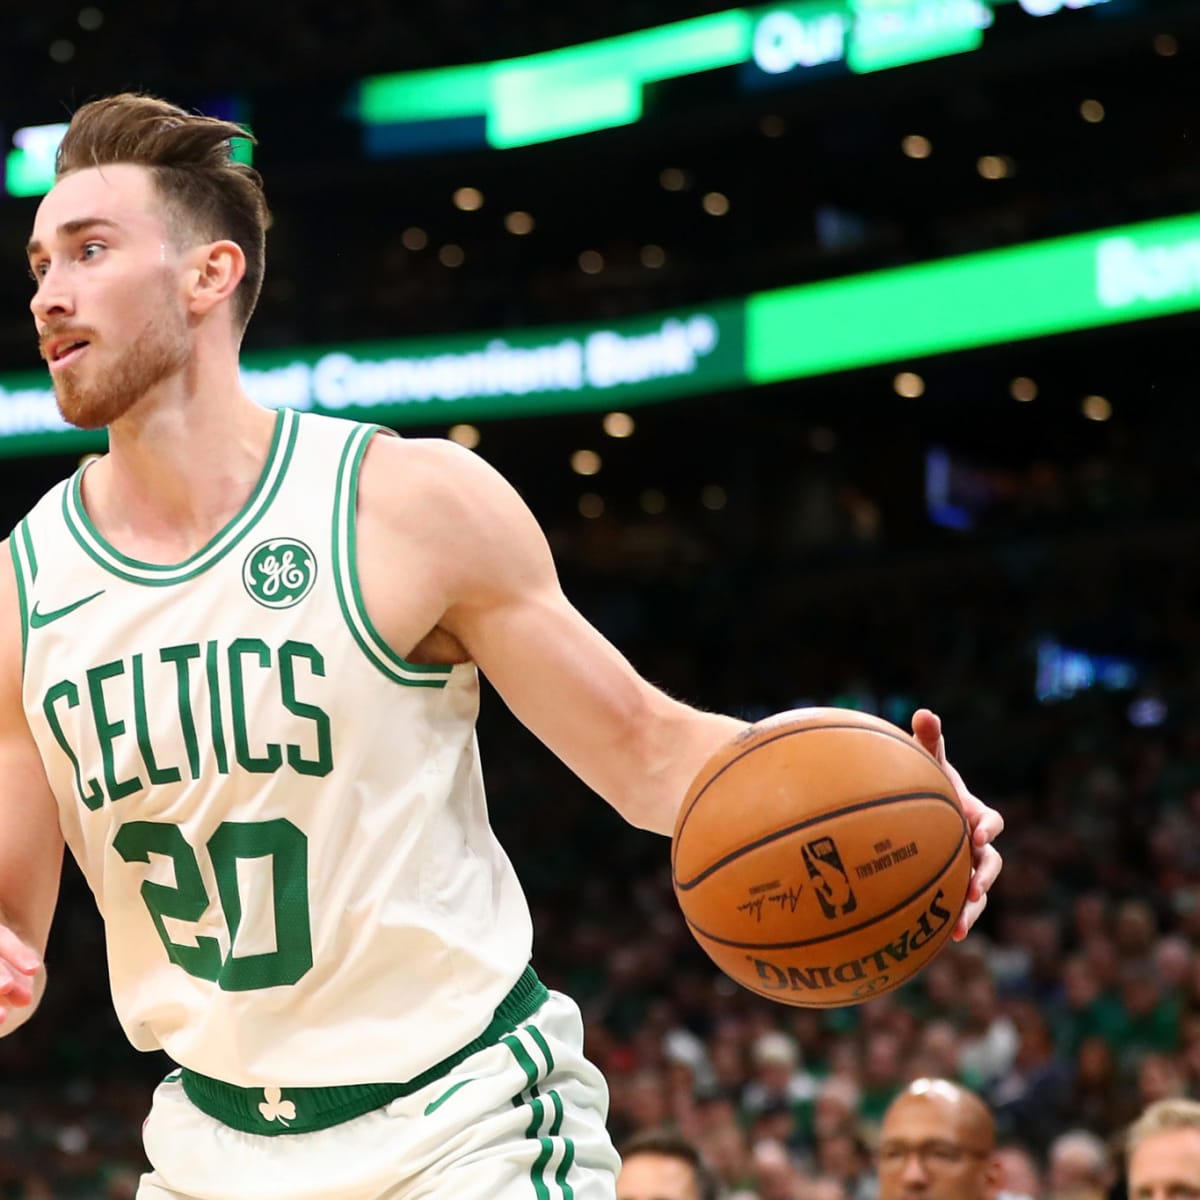 Gordon Hayward becomes free agent after opting out of contract